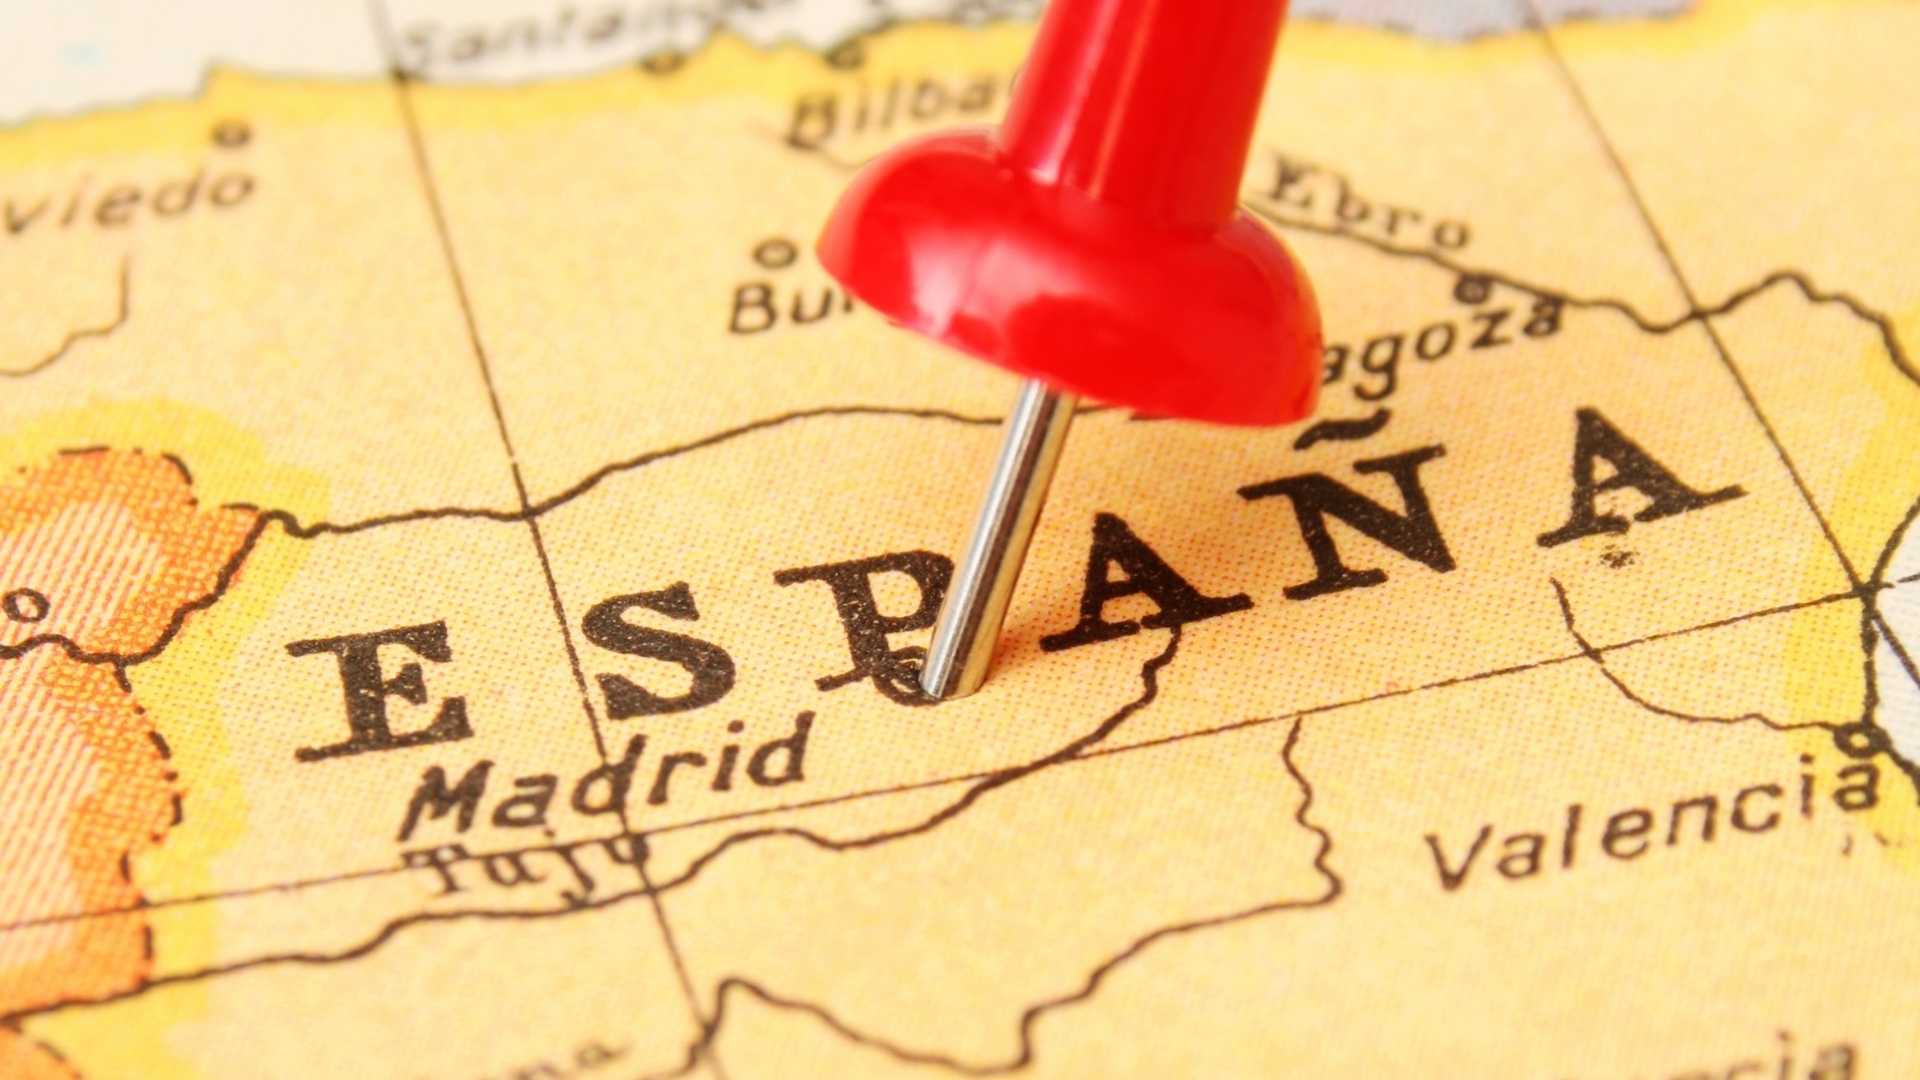 INDUSTRIAL PROPERTY LAWS IN SPAIN. NEW PARADIGM